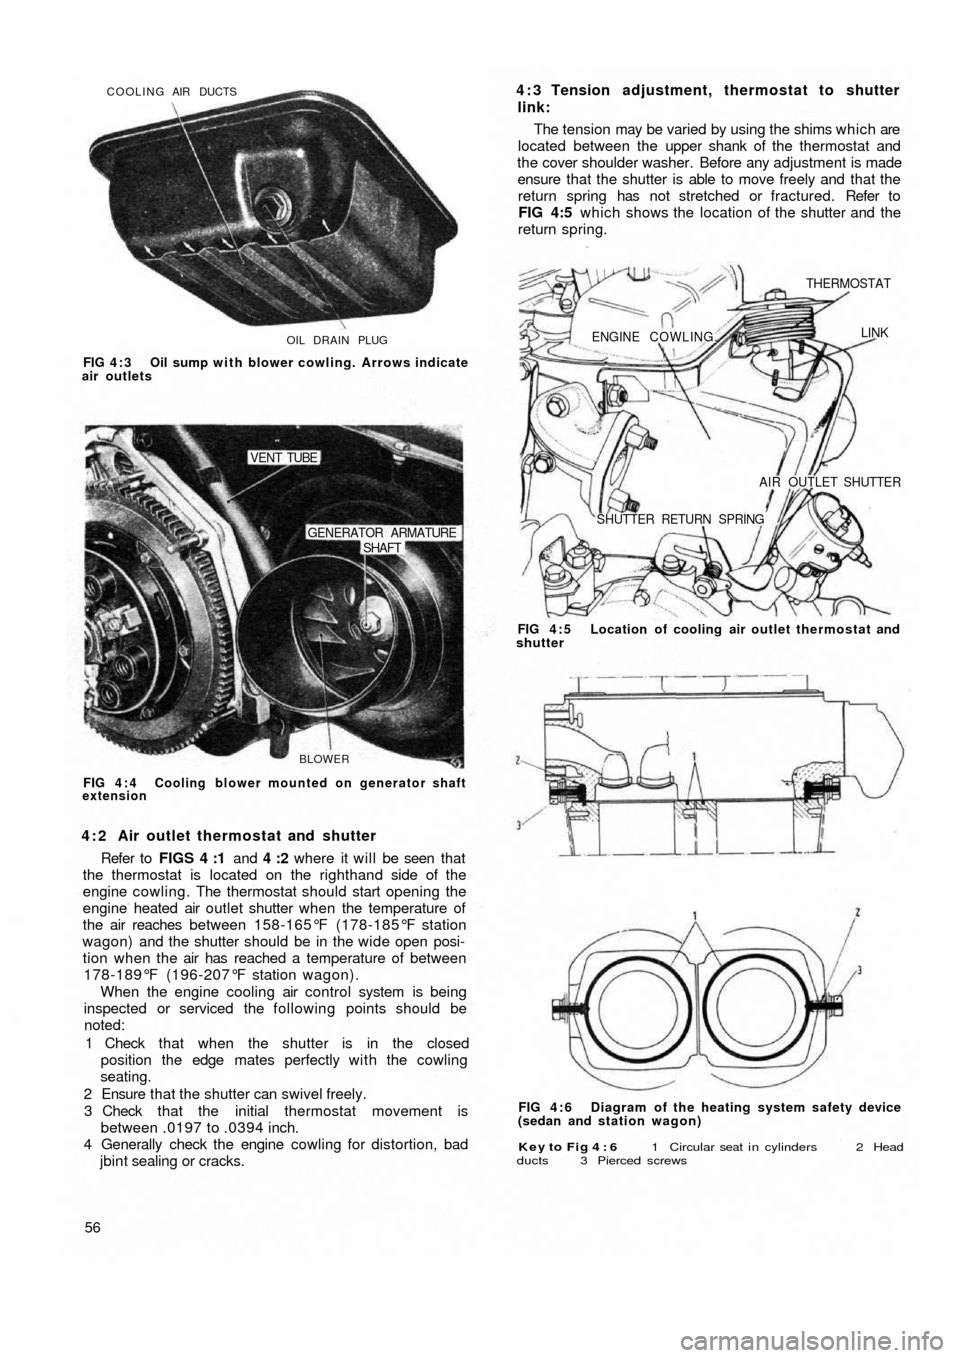 FIAT 500 1960 1.G Workshop Manual OIL DRAIN PLUG COOLING AIR DUCTS
FIG 4 : 3  Oil sump with blower cowling. Arrows indicate
air outlets
BLOWER
SHAFT GENERATOR ARMATURE
VENT TUBE
FIG 4 : 4  Cooling blower mounted on generator shaft
ext